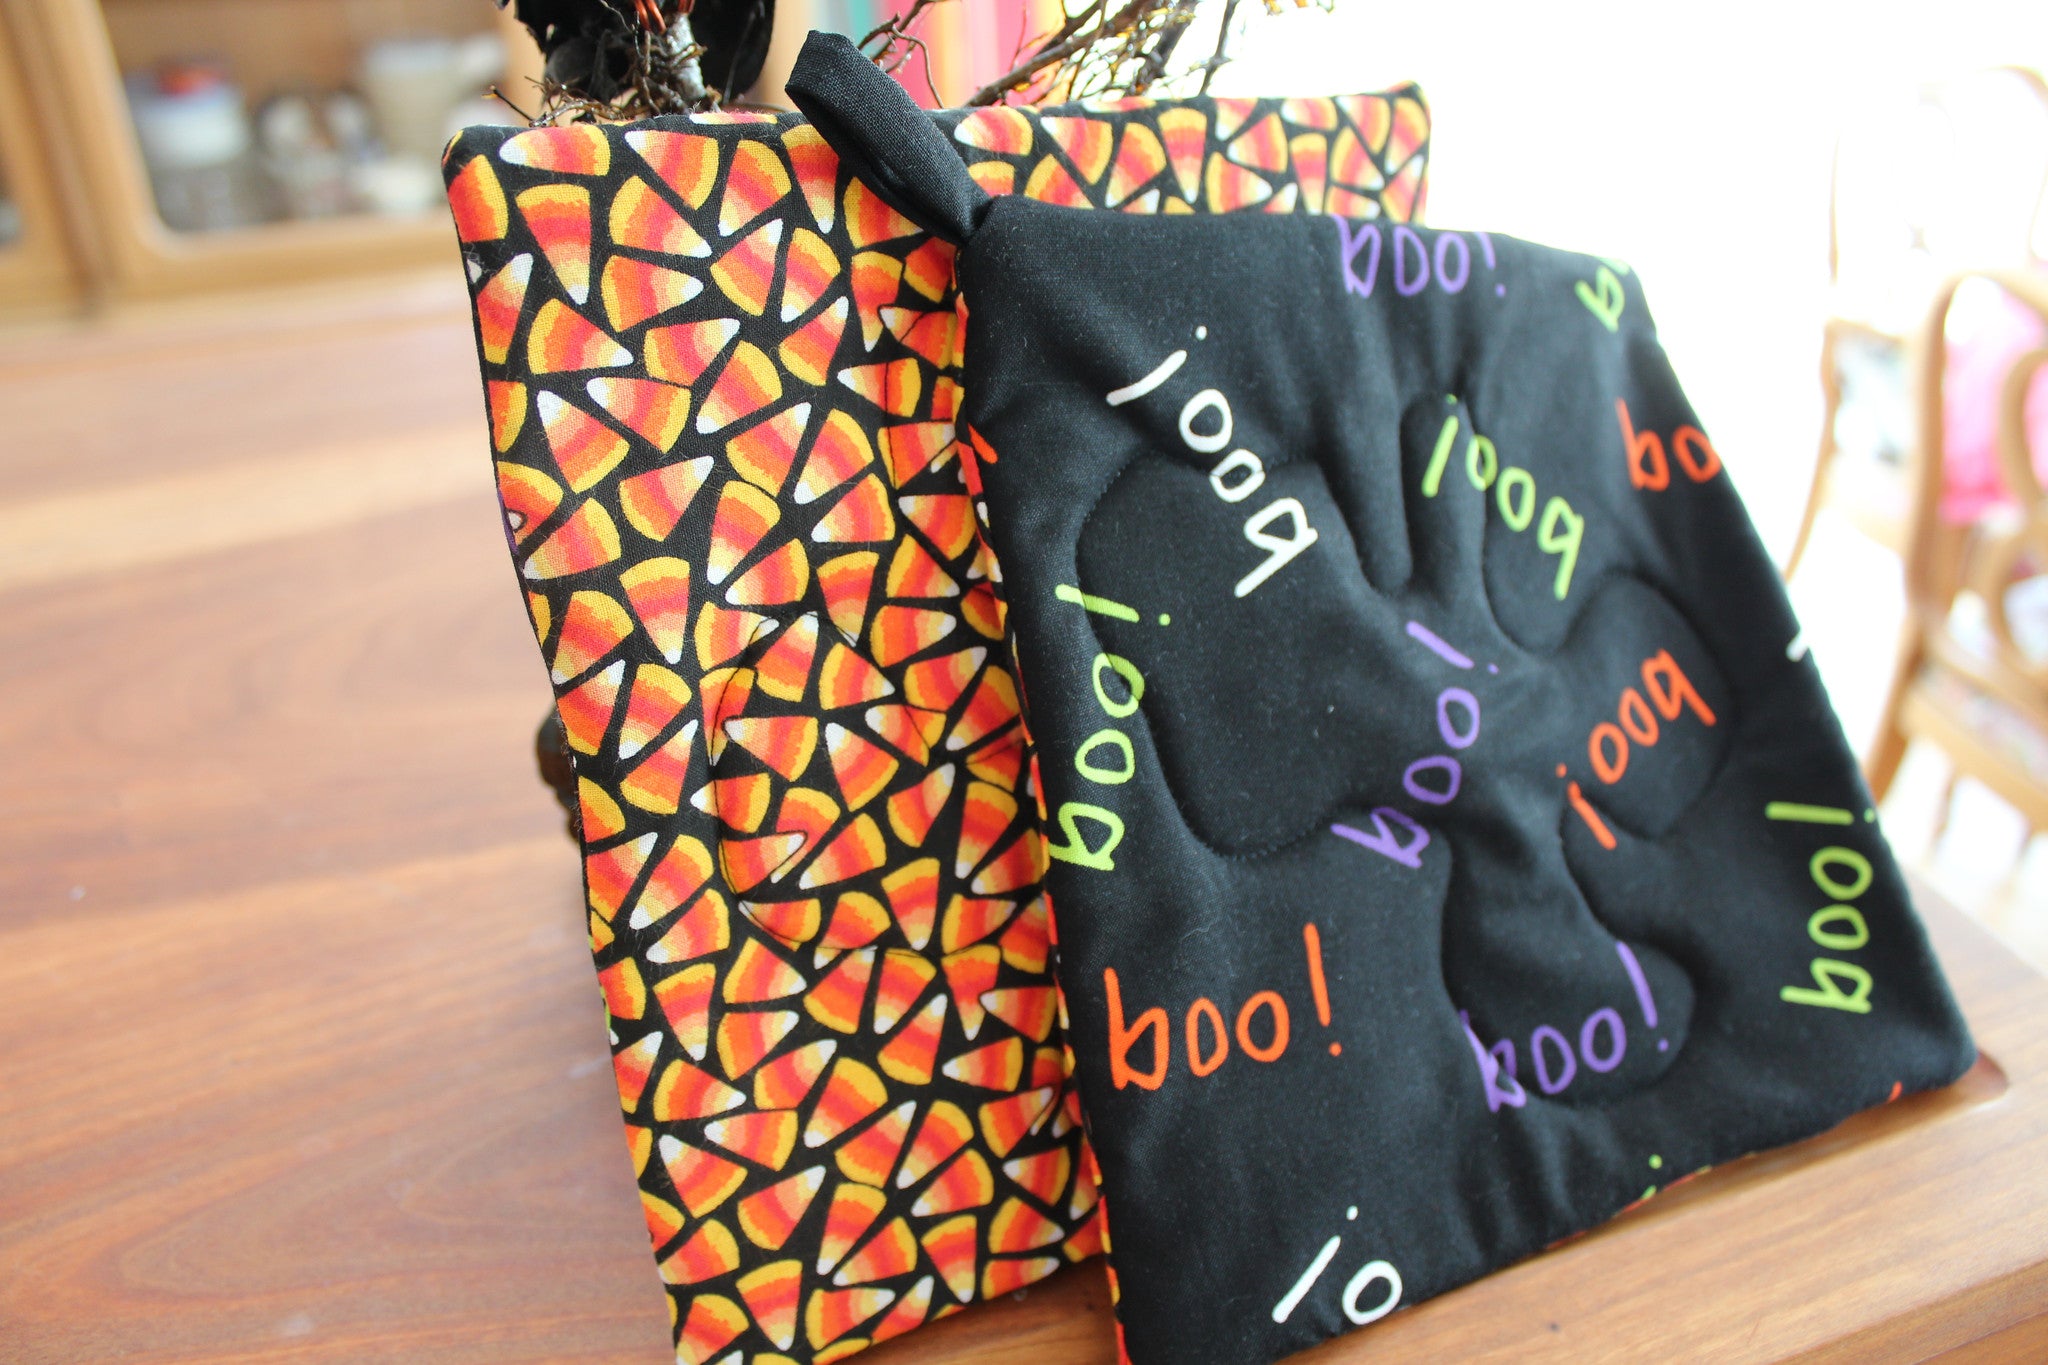 Candy Corn Boo! Potholder-The Blue Peony-Category_Pot Holder,Color_Black,Color_Orange,Department_Kitchen,Size_Traditional (Square),Theme_Food,Theme_Halloween